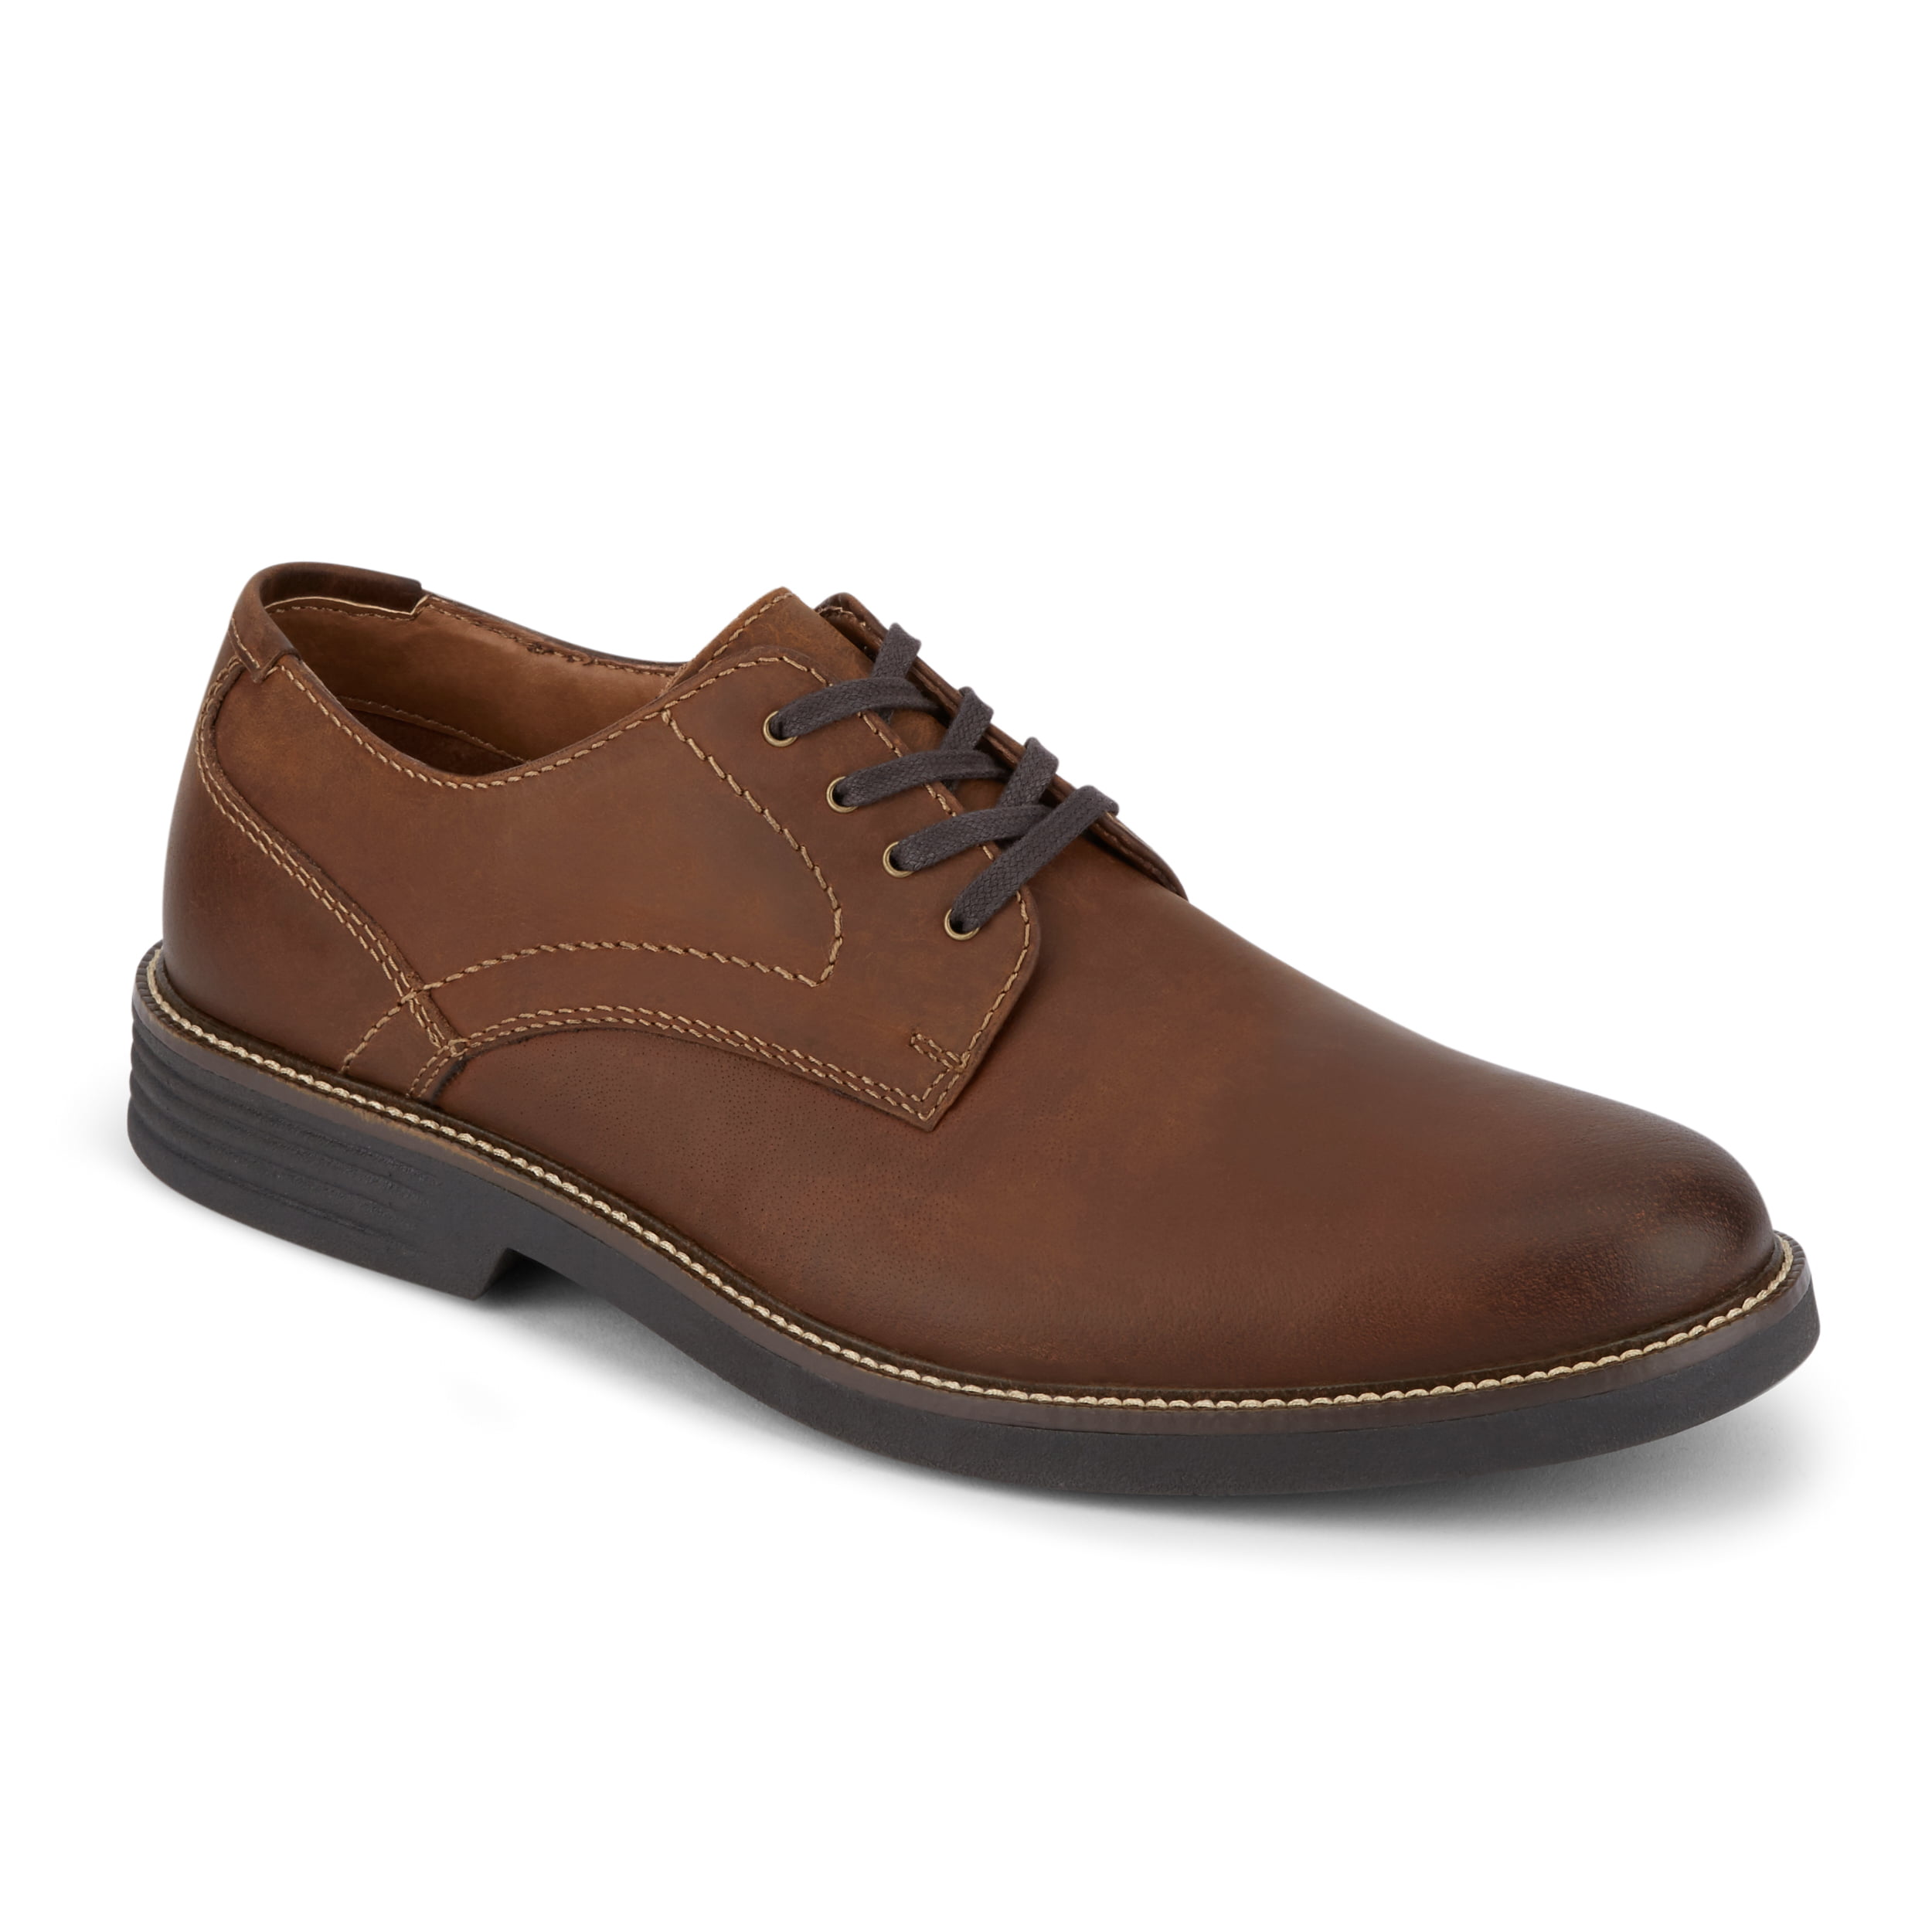 Dockers Mens Parkway Leather Dress Casual Oxford Shoe with NeverWet ...